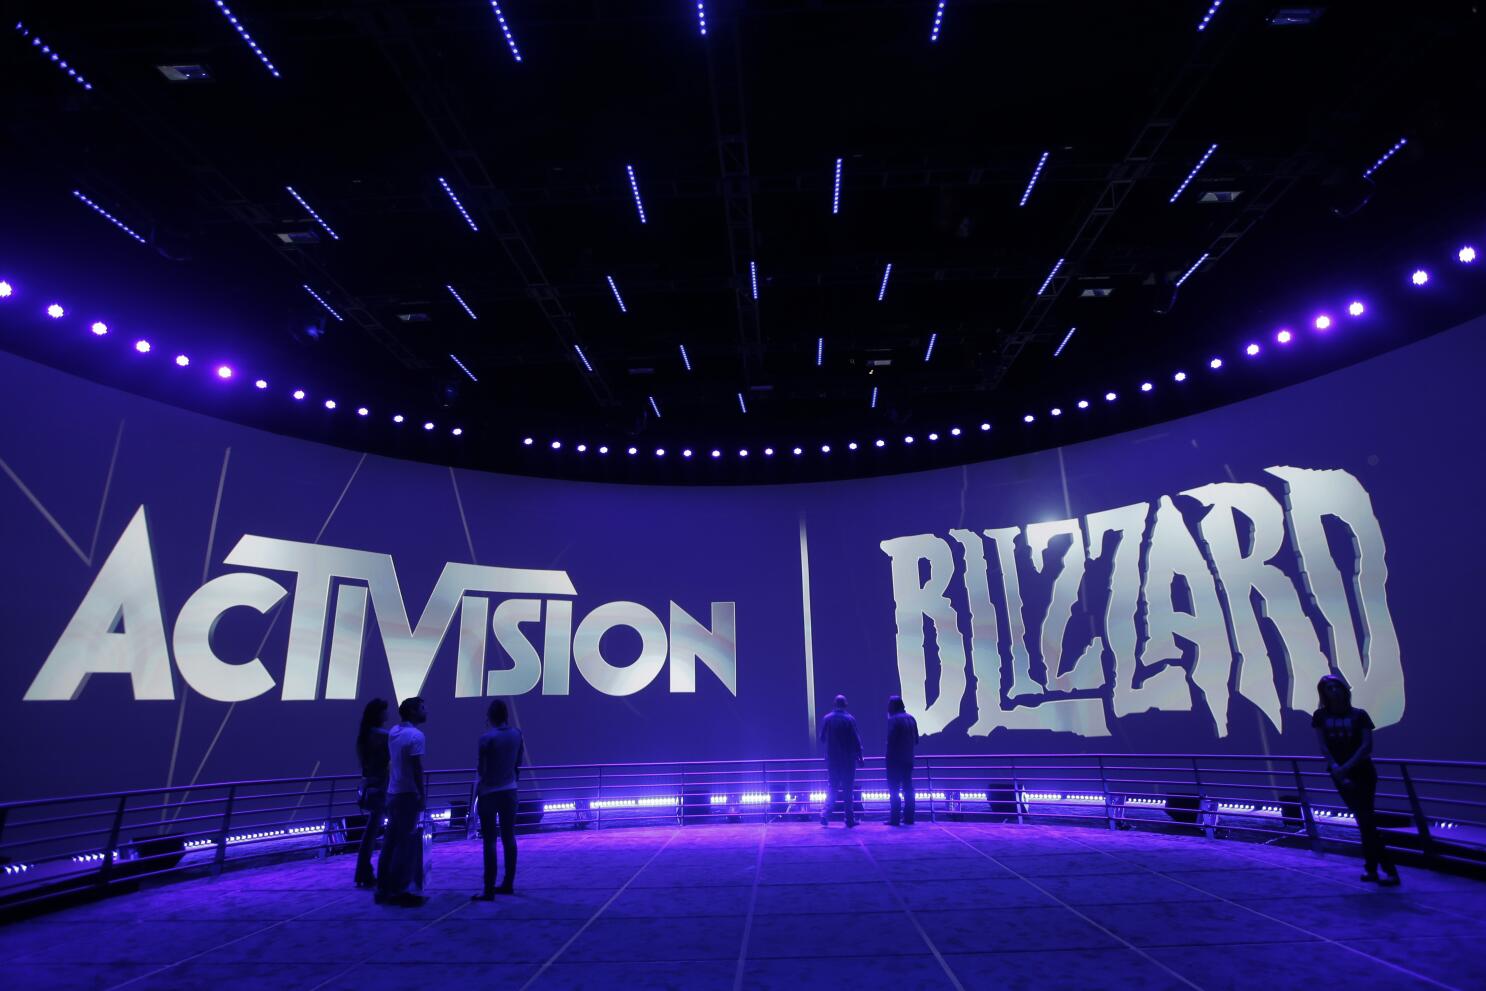 Microsoft Deal to Buy Activision Blizzard Is Officially Blocked by UK's CMA